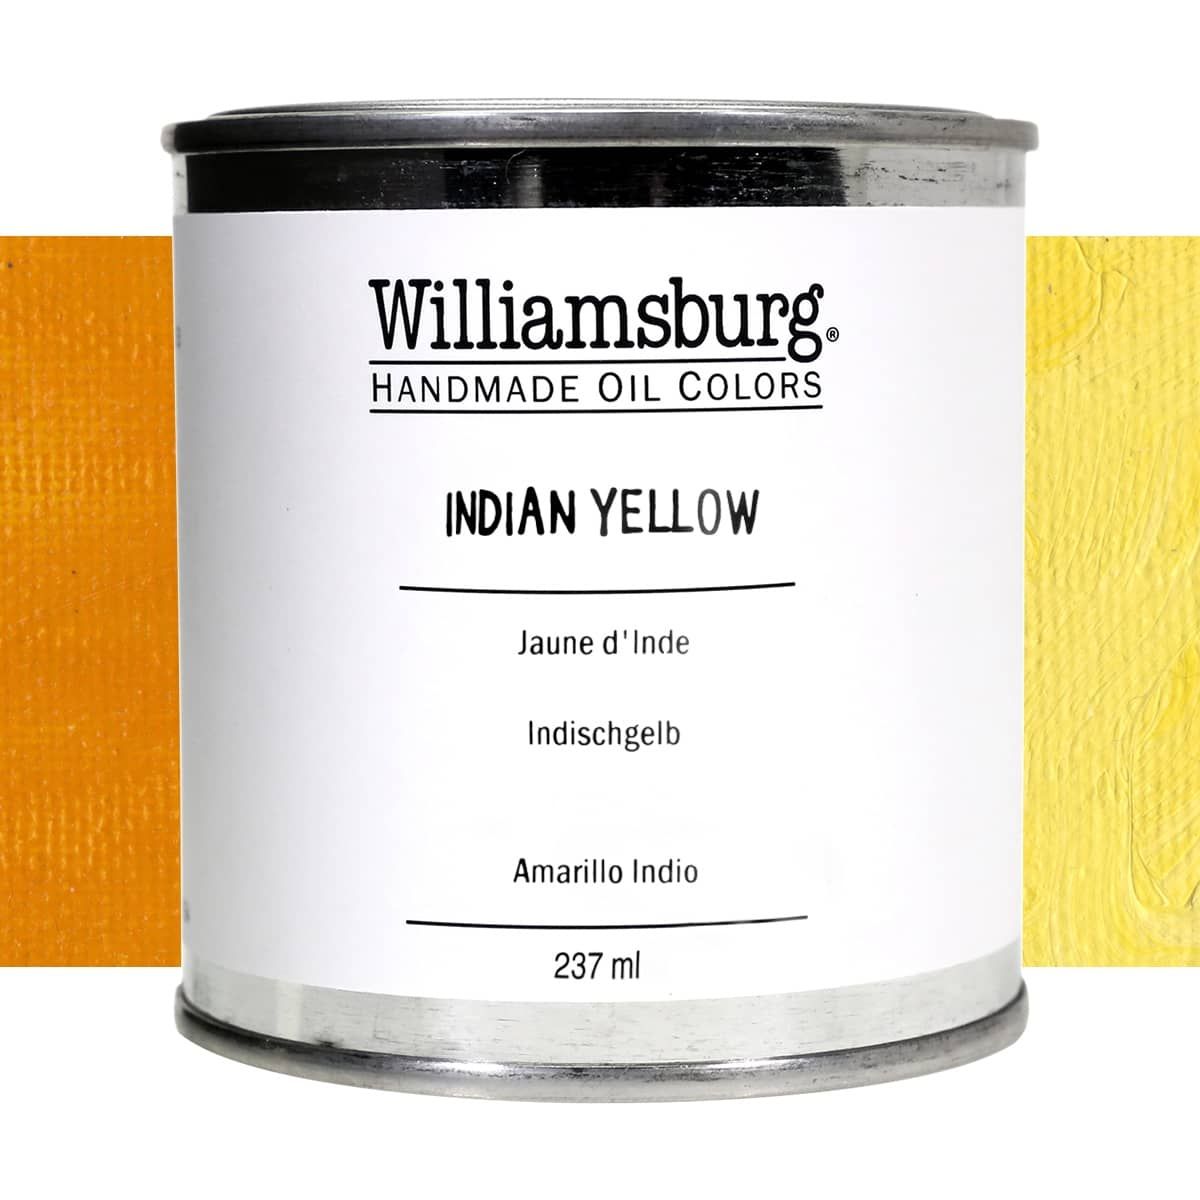 Williamsburg Oil Color 237 ml Can Indian Yellow